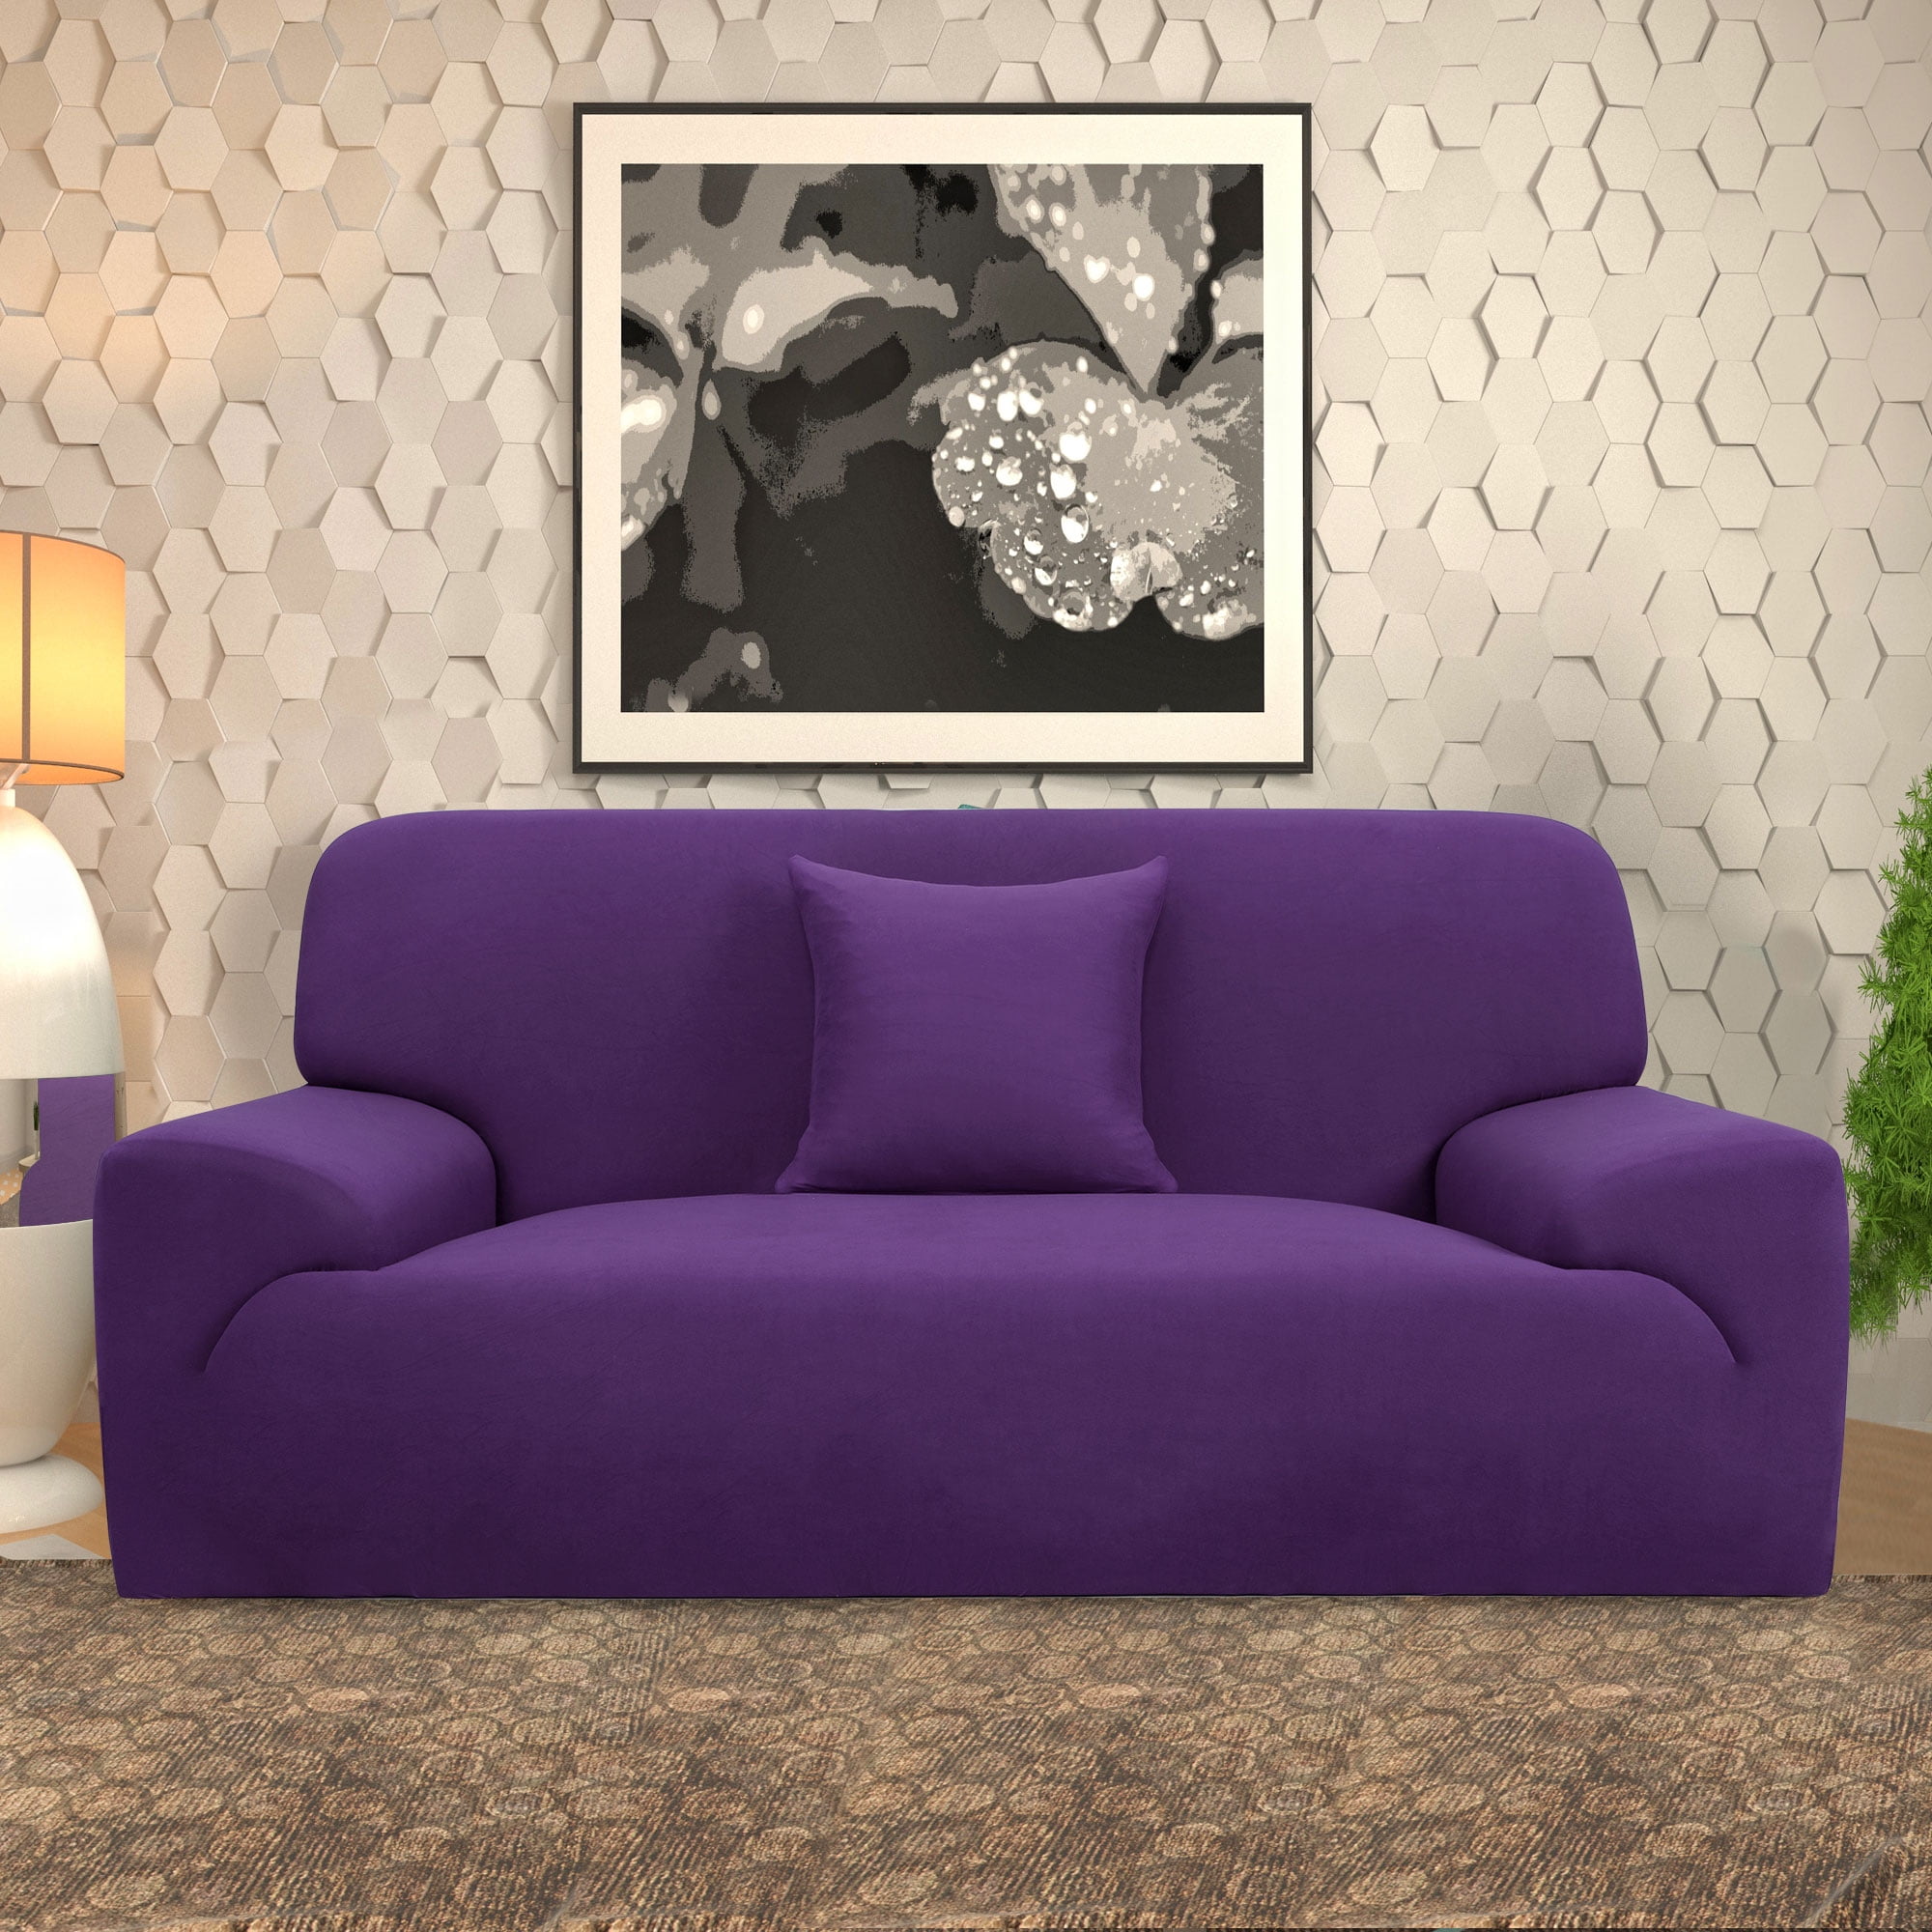 SOFA / LOVESEAT / CHAIR  /RECLINER PRICED OK JERSEY STRETCH PURPLE SLIPCOVERS 